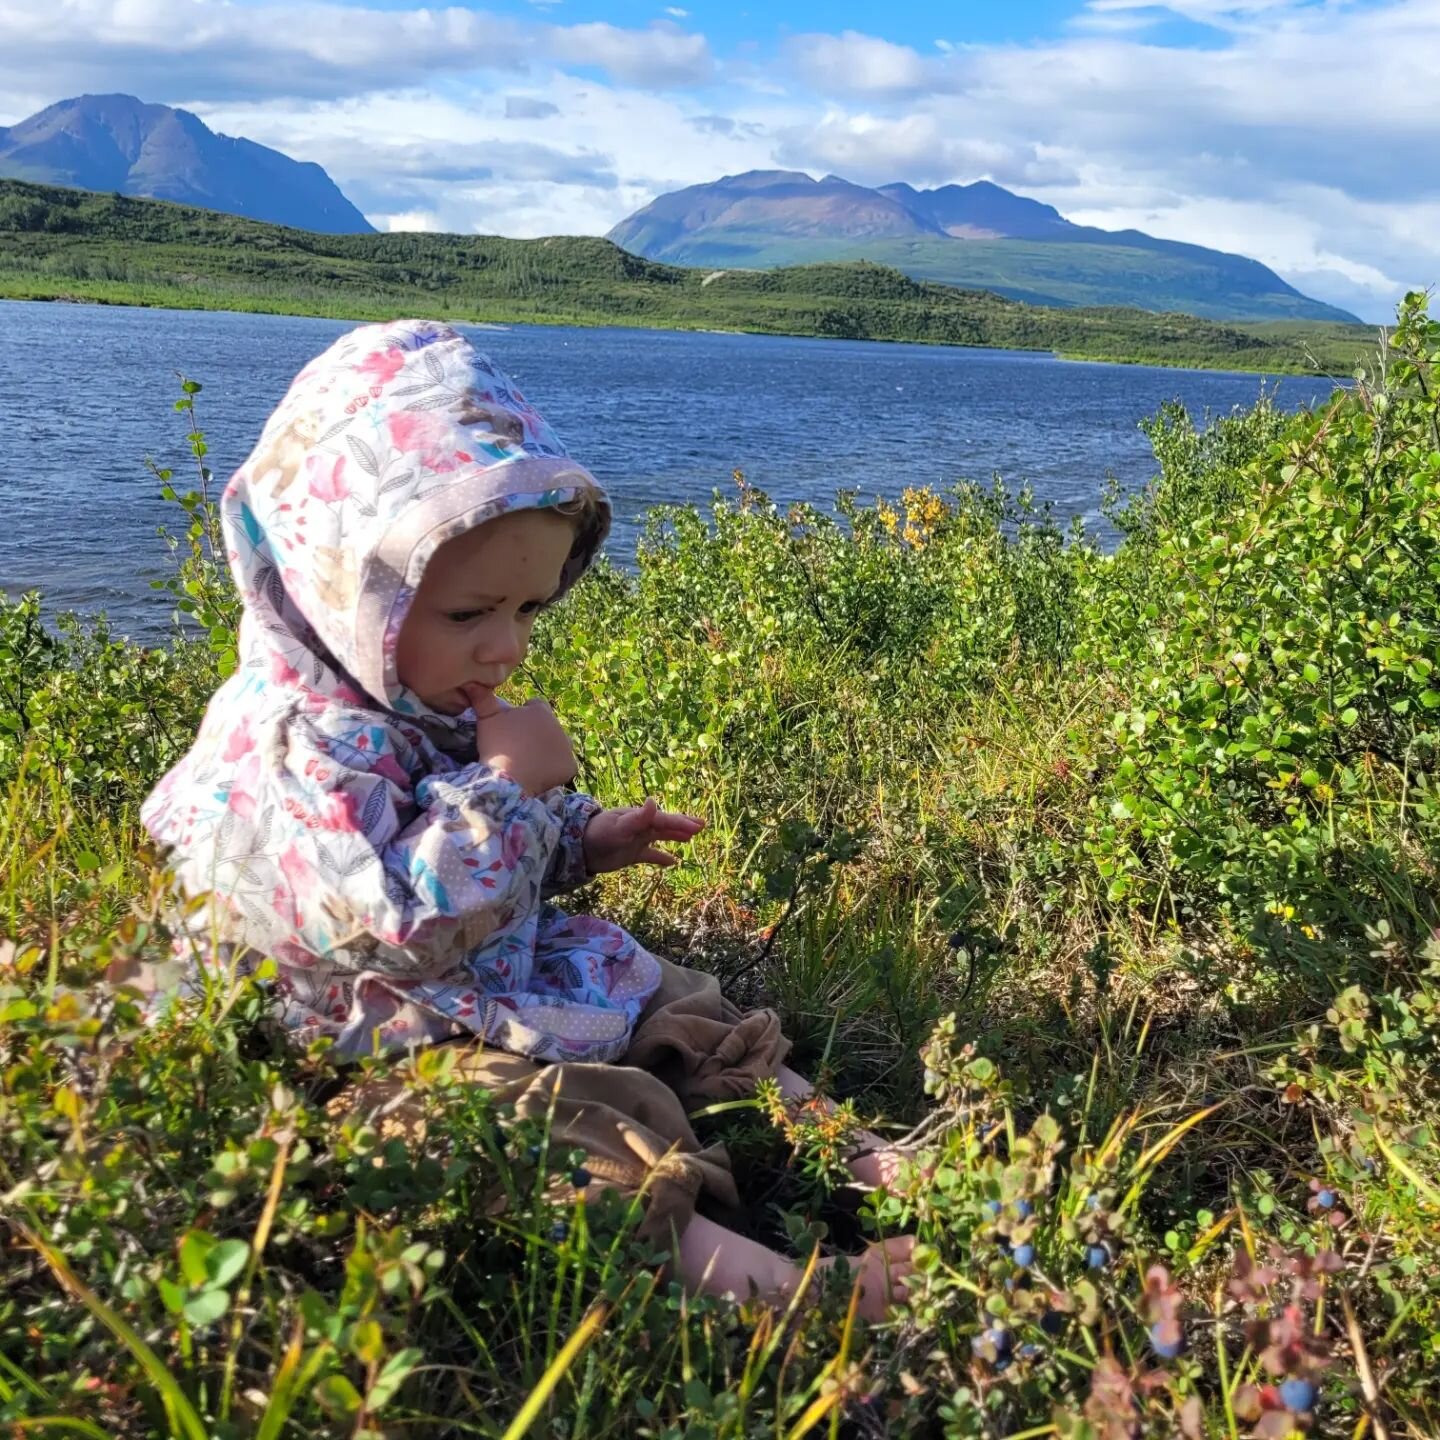 Alaska summers are so fleeting! A few pictures from our blueberry picking trip.

#blueberries #alaskasummer #campingwithtoddlers